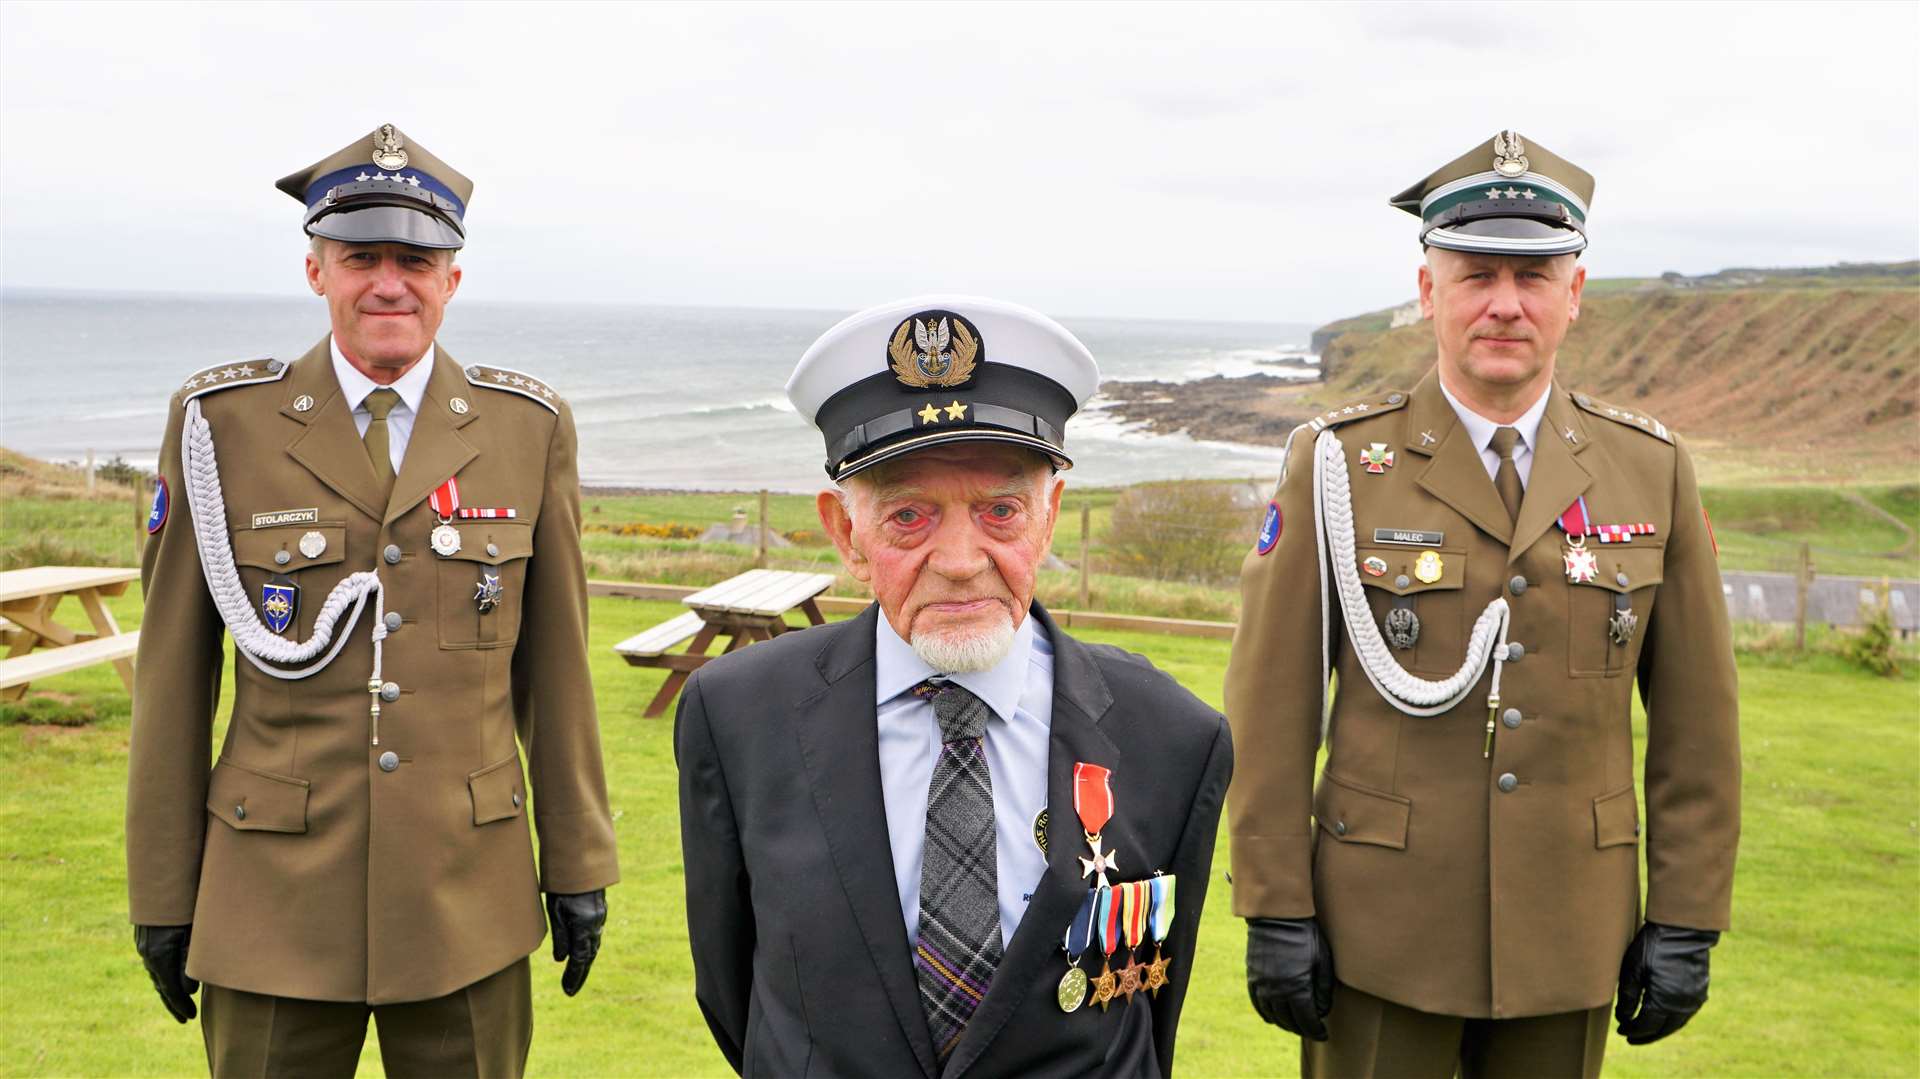 In 2021, Richard Polanski was awarded a special promotion from the Polish President Andrzej Duda, given on his behalf by the embassy staff. From left, Polish defence attaché Colonel Mieczysław Malec, Richard Polanski wearing his honorary naval hat, and Polish warrant officer Krzysztof Stolarczyk. Picture: DGS